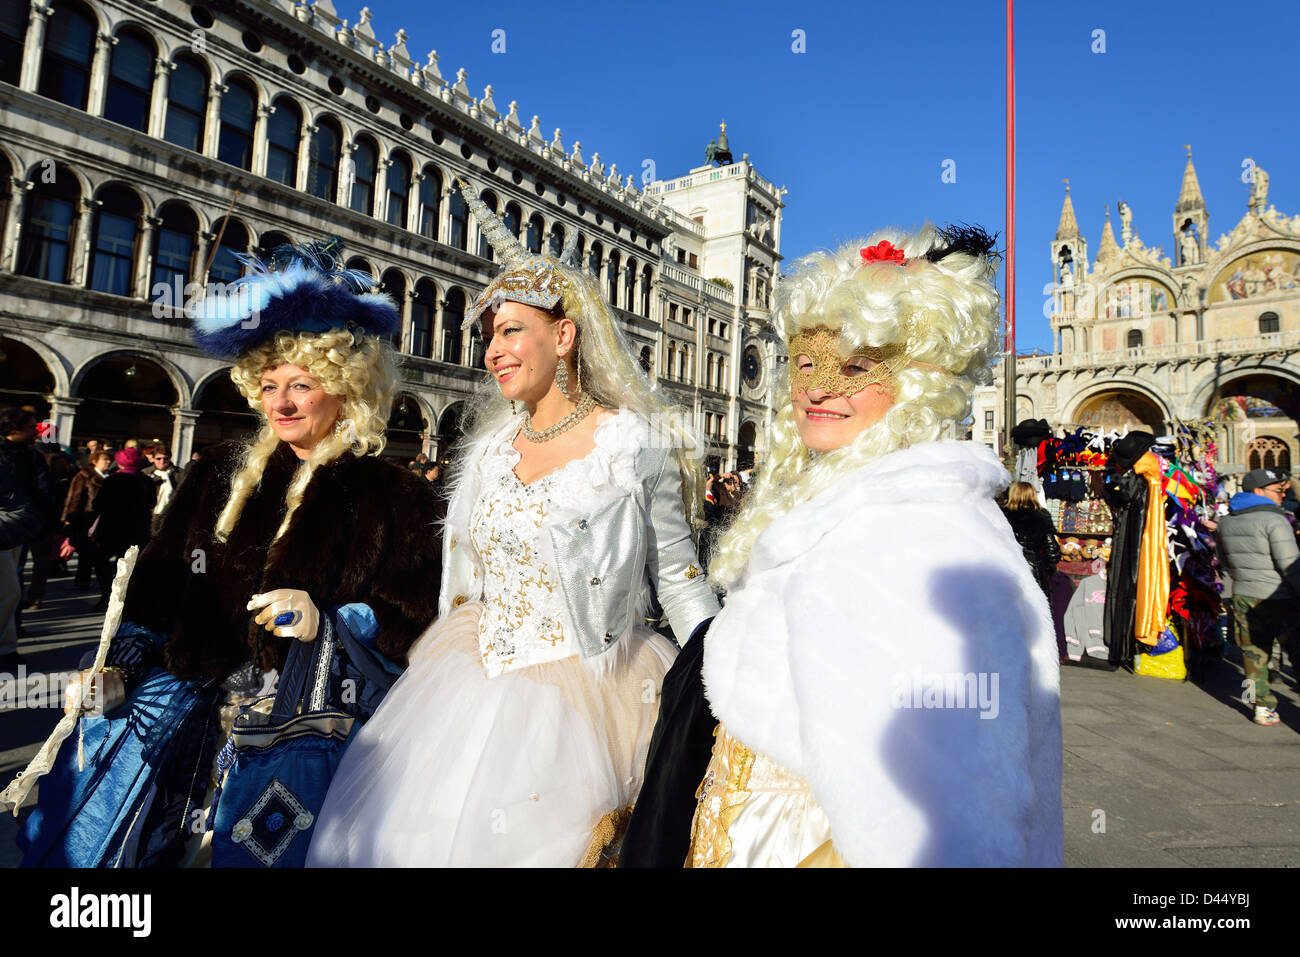 Masks and costumes during 2013 carnival at Venice; Veneto, Italy. Stock Photo